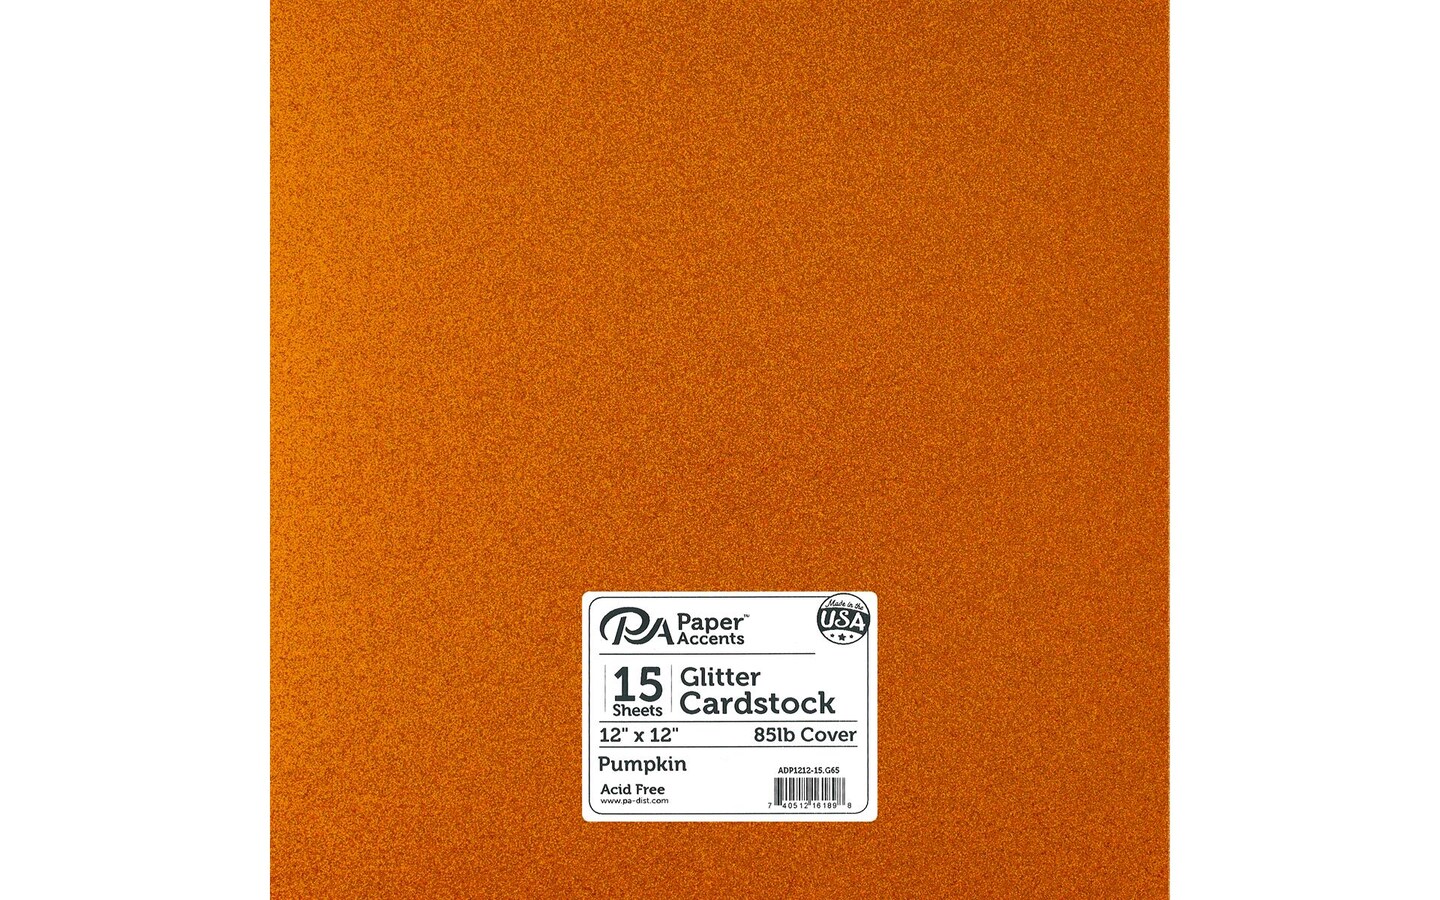 PA Paper Accents Glitter Cardstock 12&#x22; x 12&#x22; Pumpkin, 85lb colored cardstock paper for card making, scrapbooking, printing, quilling and crafts, 15 piece pack